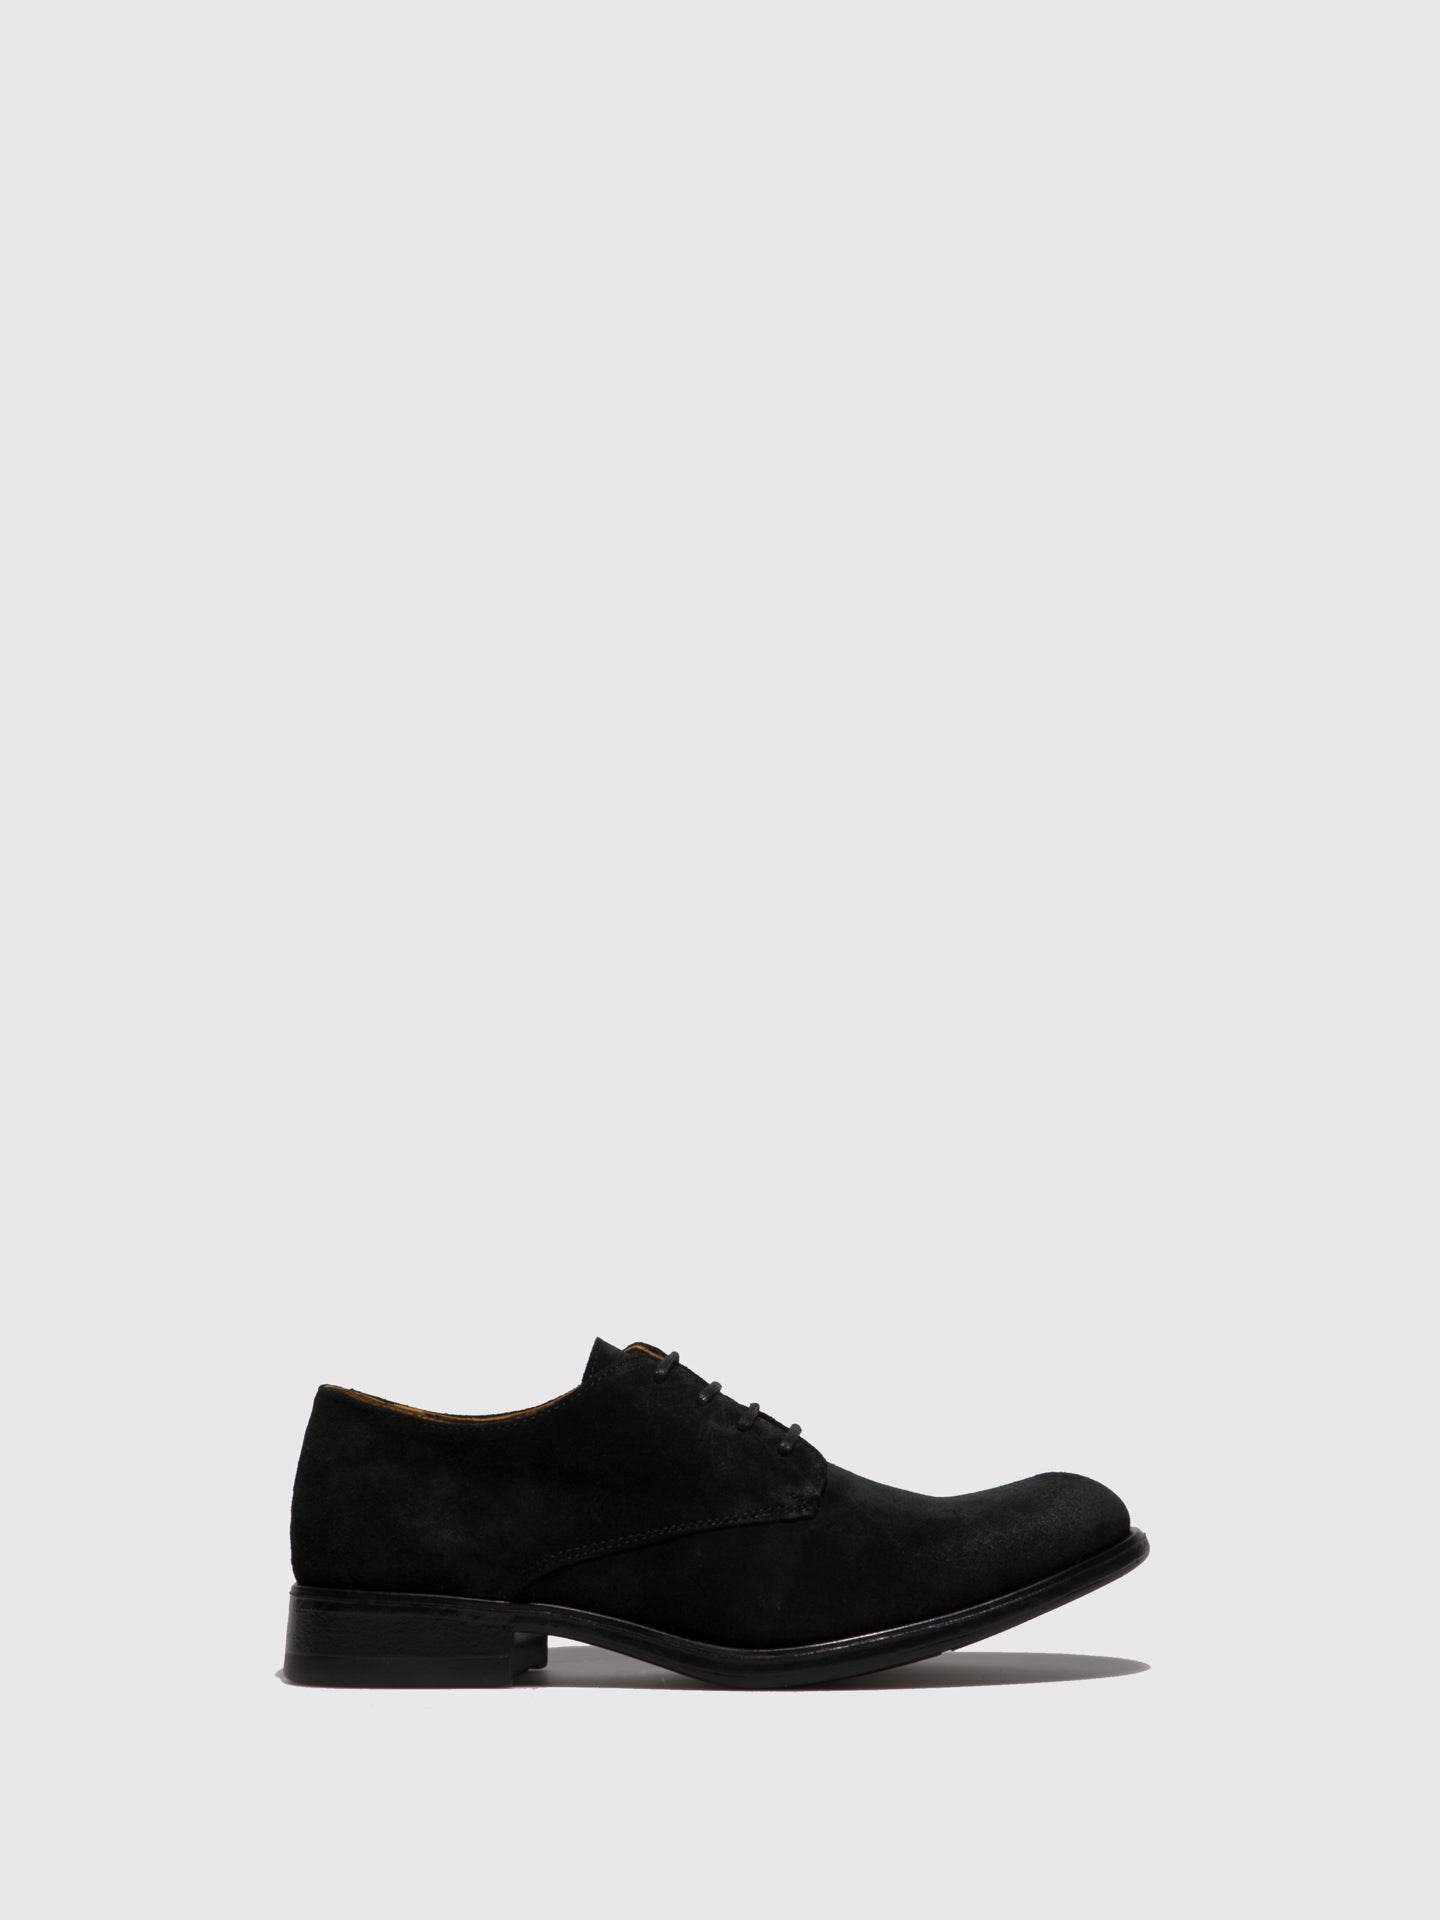 Fly London Black Suede Lace-up Shoes